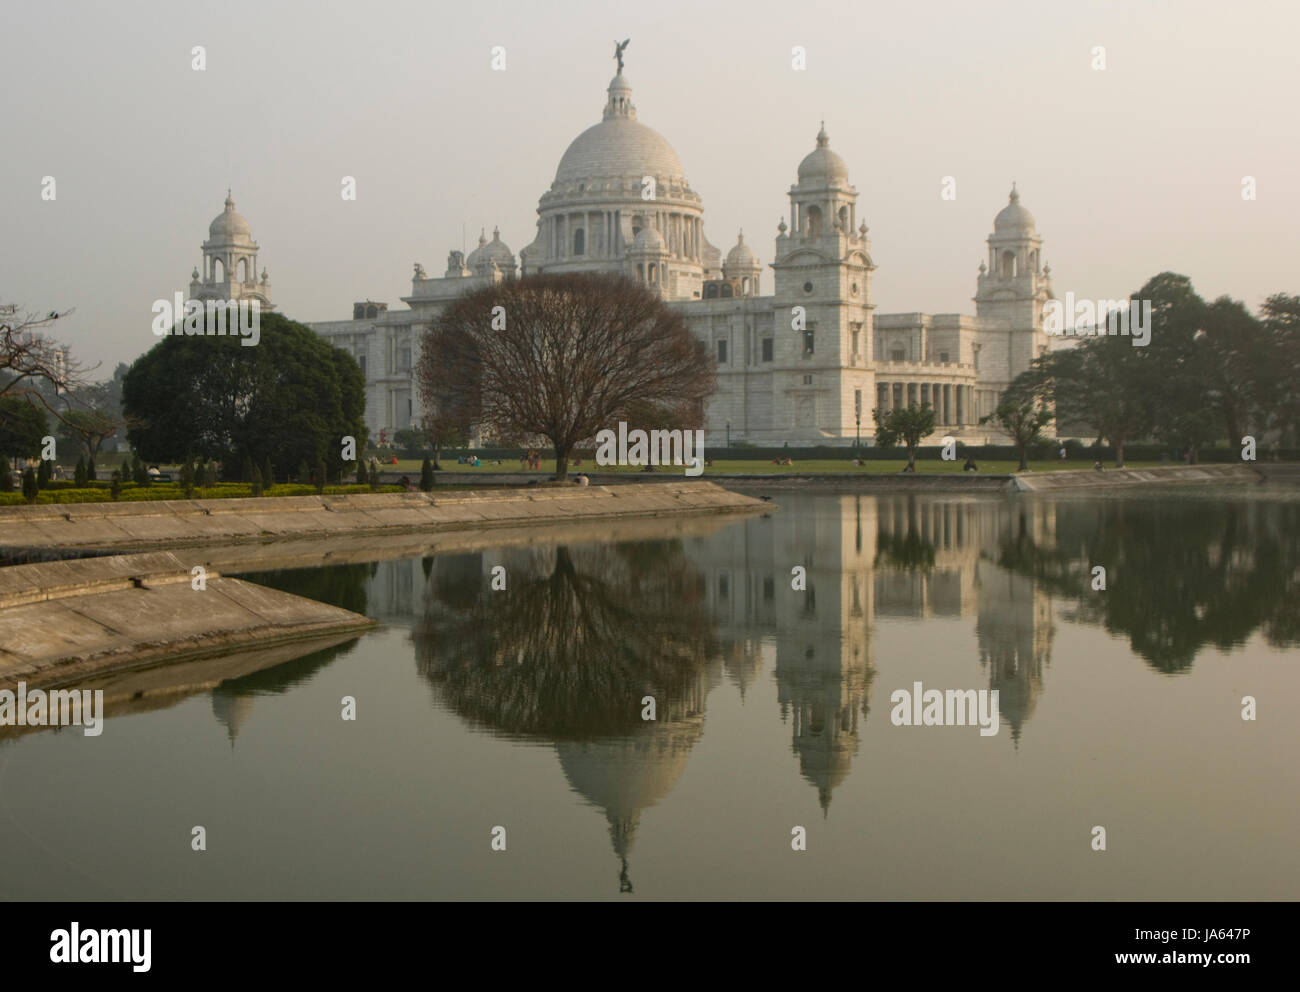 Victoria Memorial in Kolkata, West Bengal, India. Ornate white marble building reflected in an ornamental lake at dusk Stock Photo